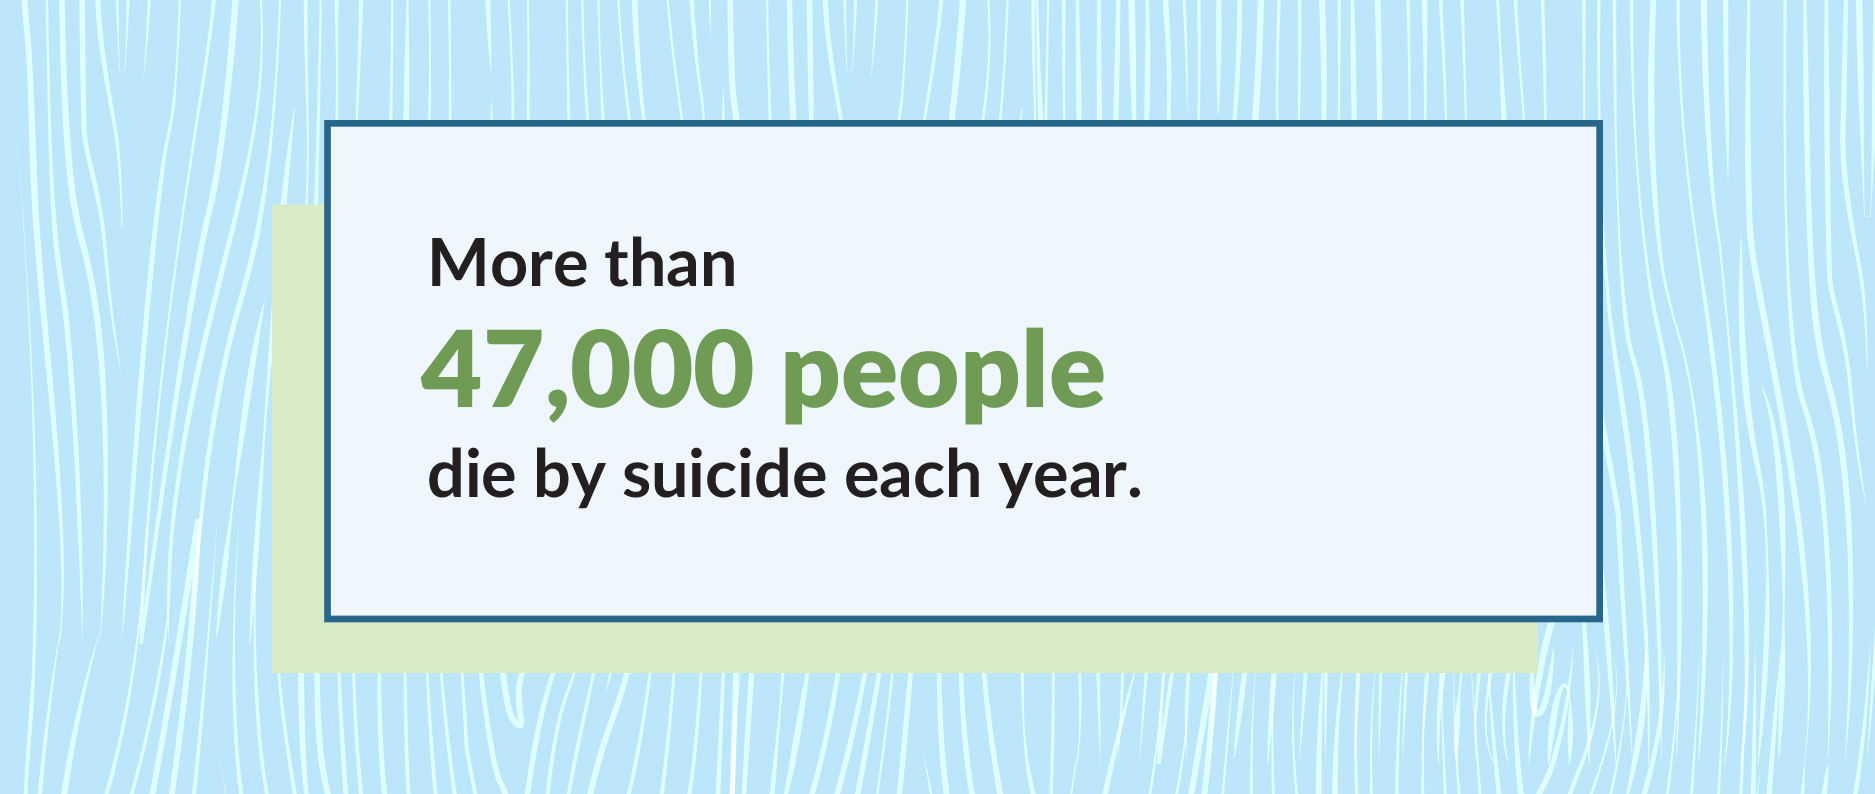 More than 47,000 people die by suicide each year.